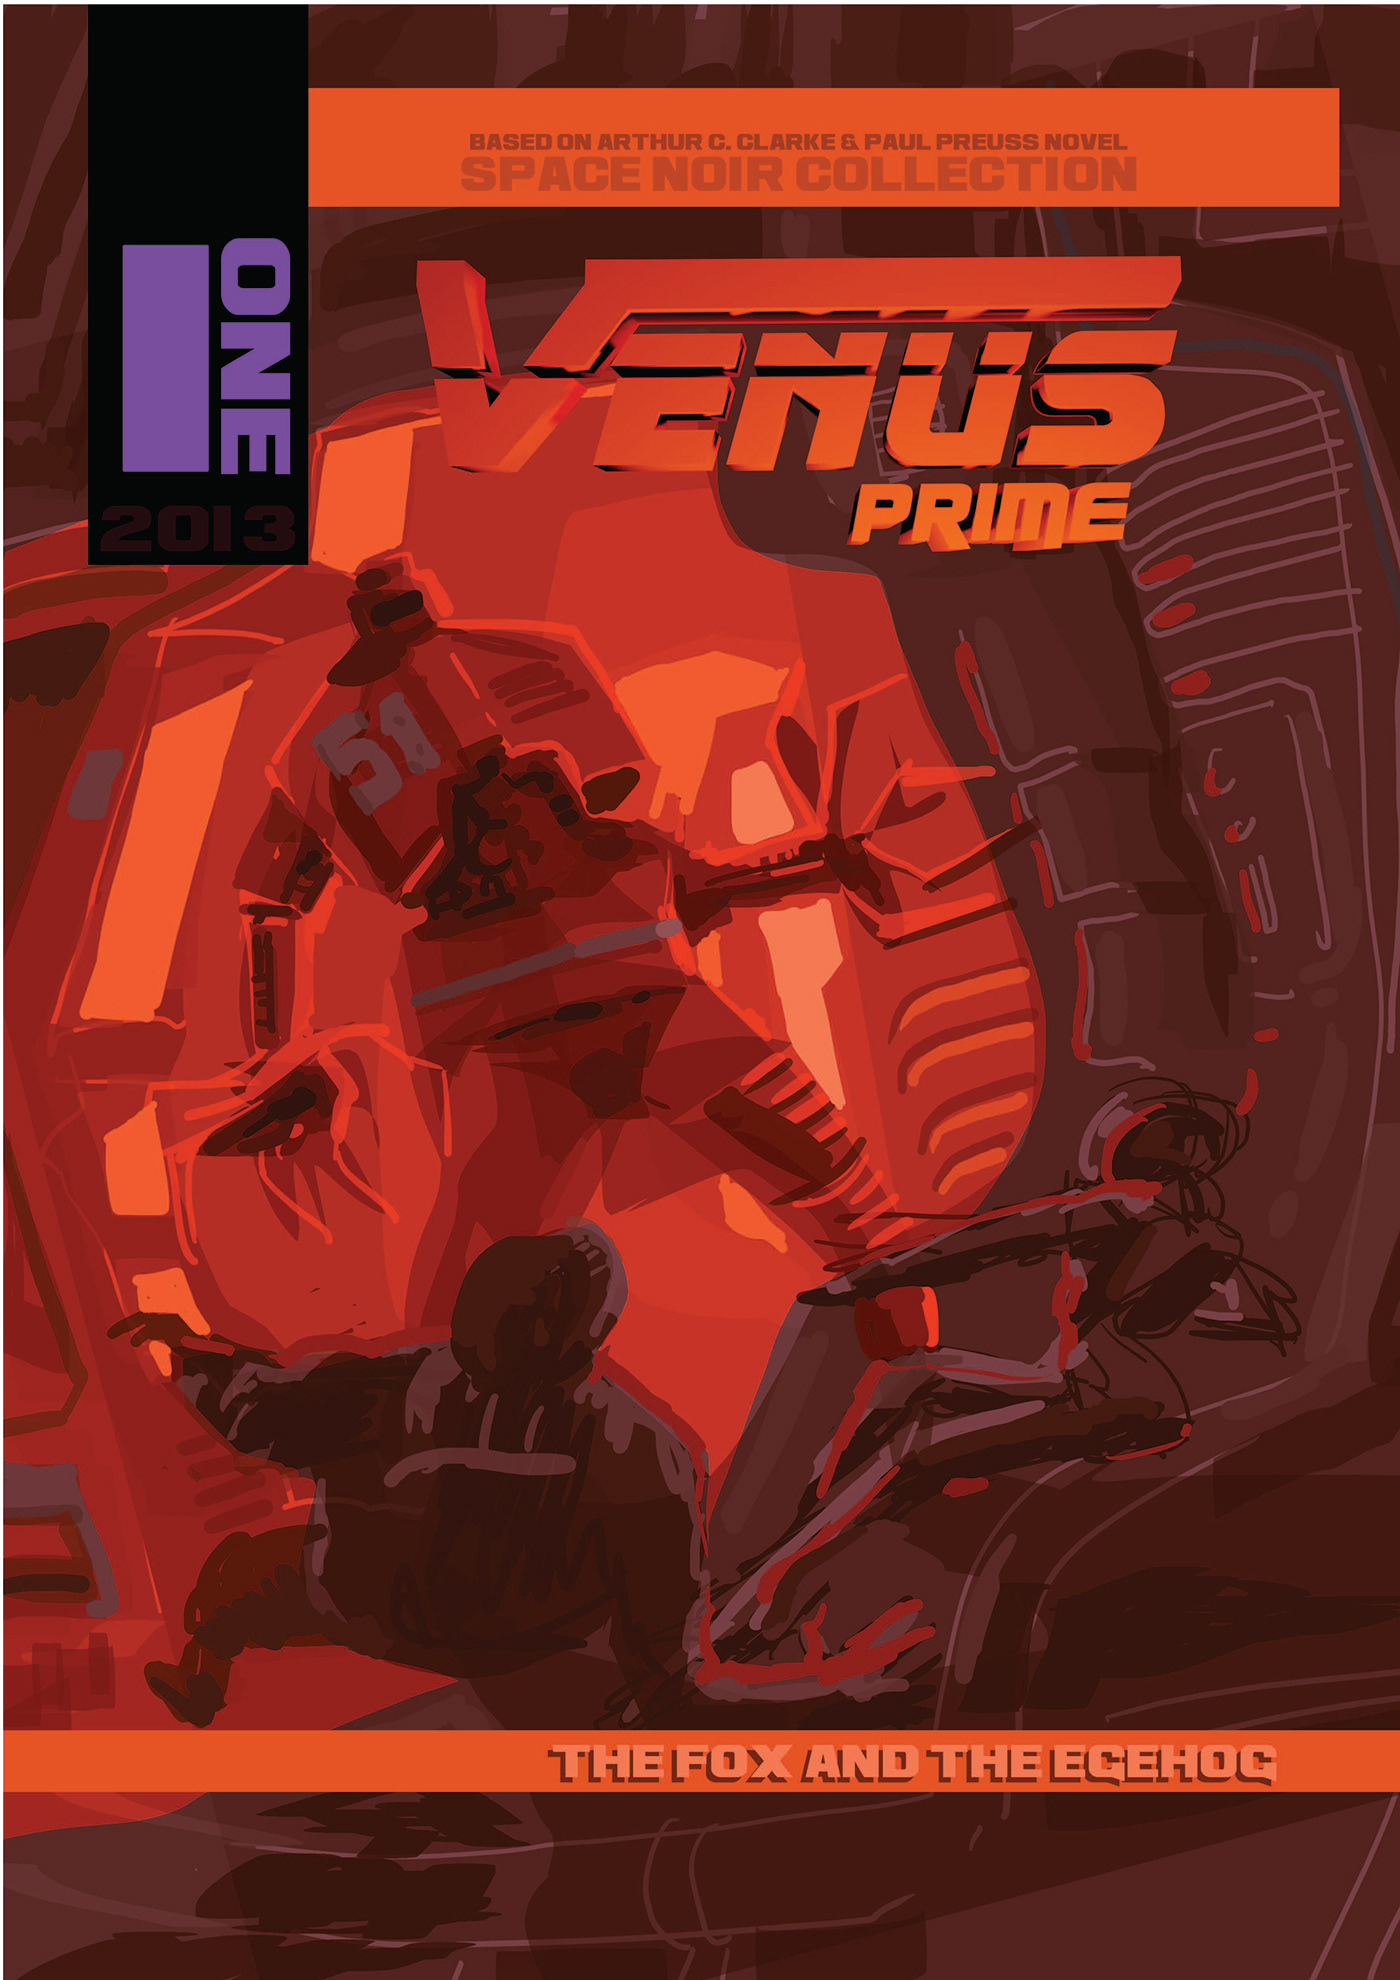 Graphic Novel sci-fi science fiction